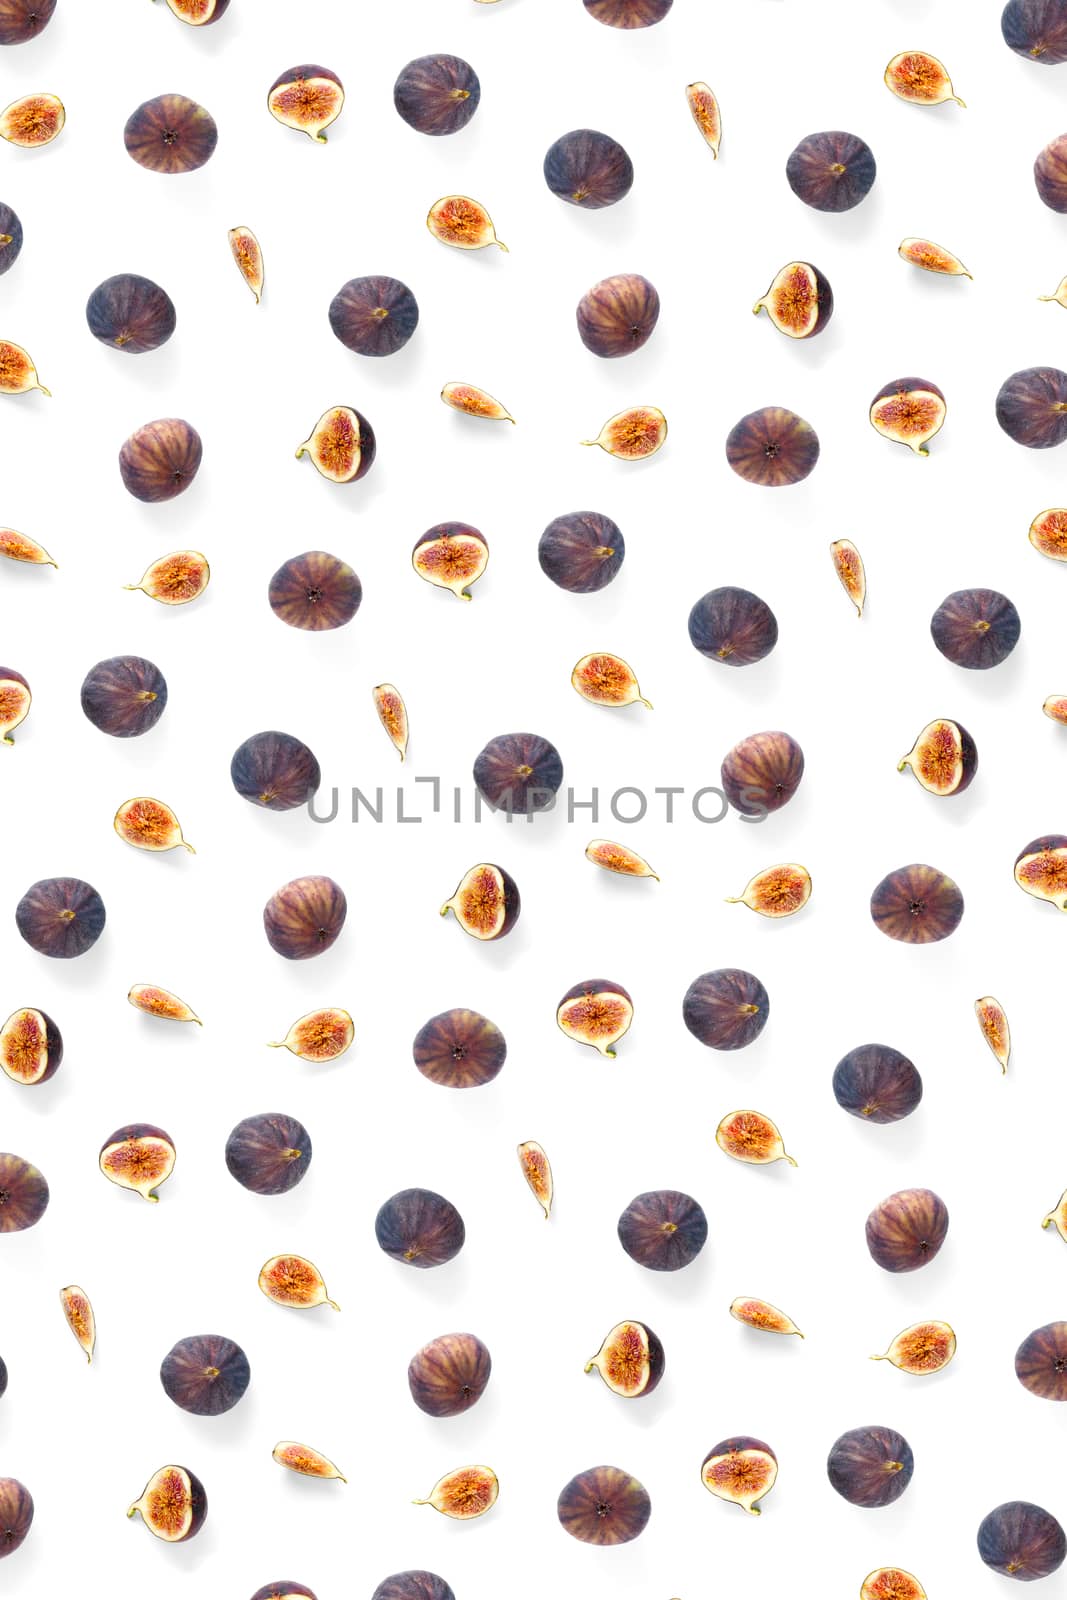 Background from Fresh figs. Food Photo. Creative set of the whole and sliced figs on a white background, Modern fig fruits background. by PhotoTime